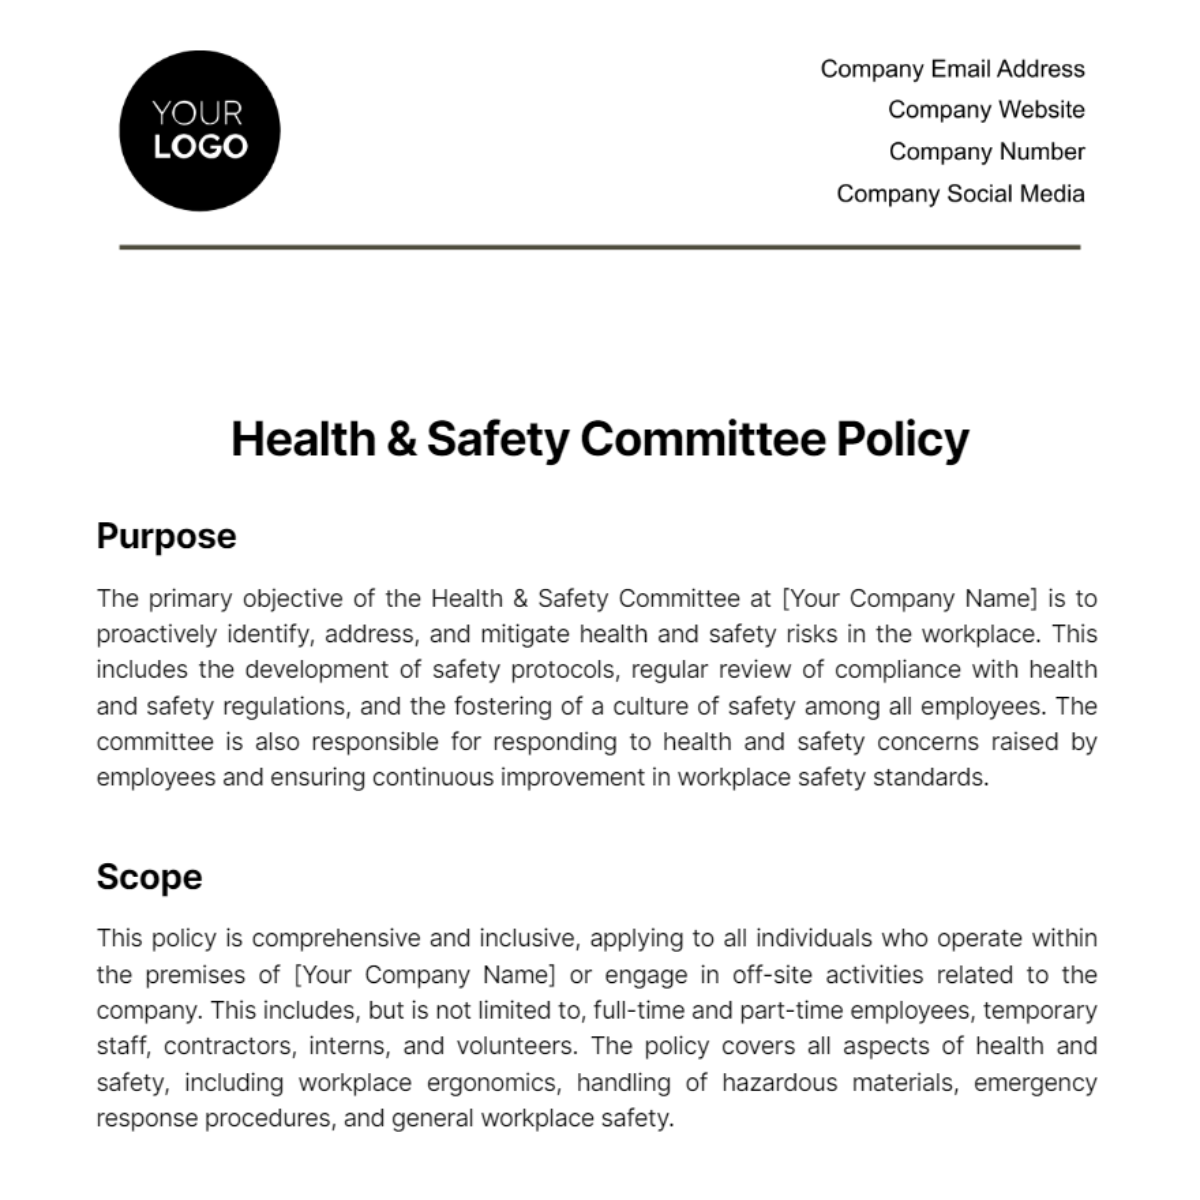 Free Health & Safety Committee Policy Template